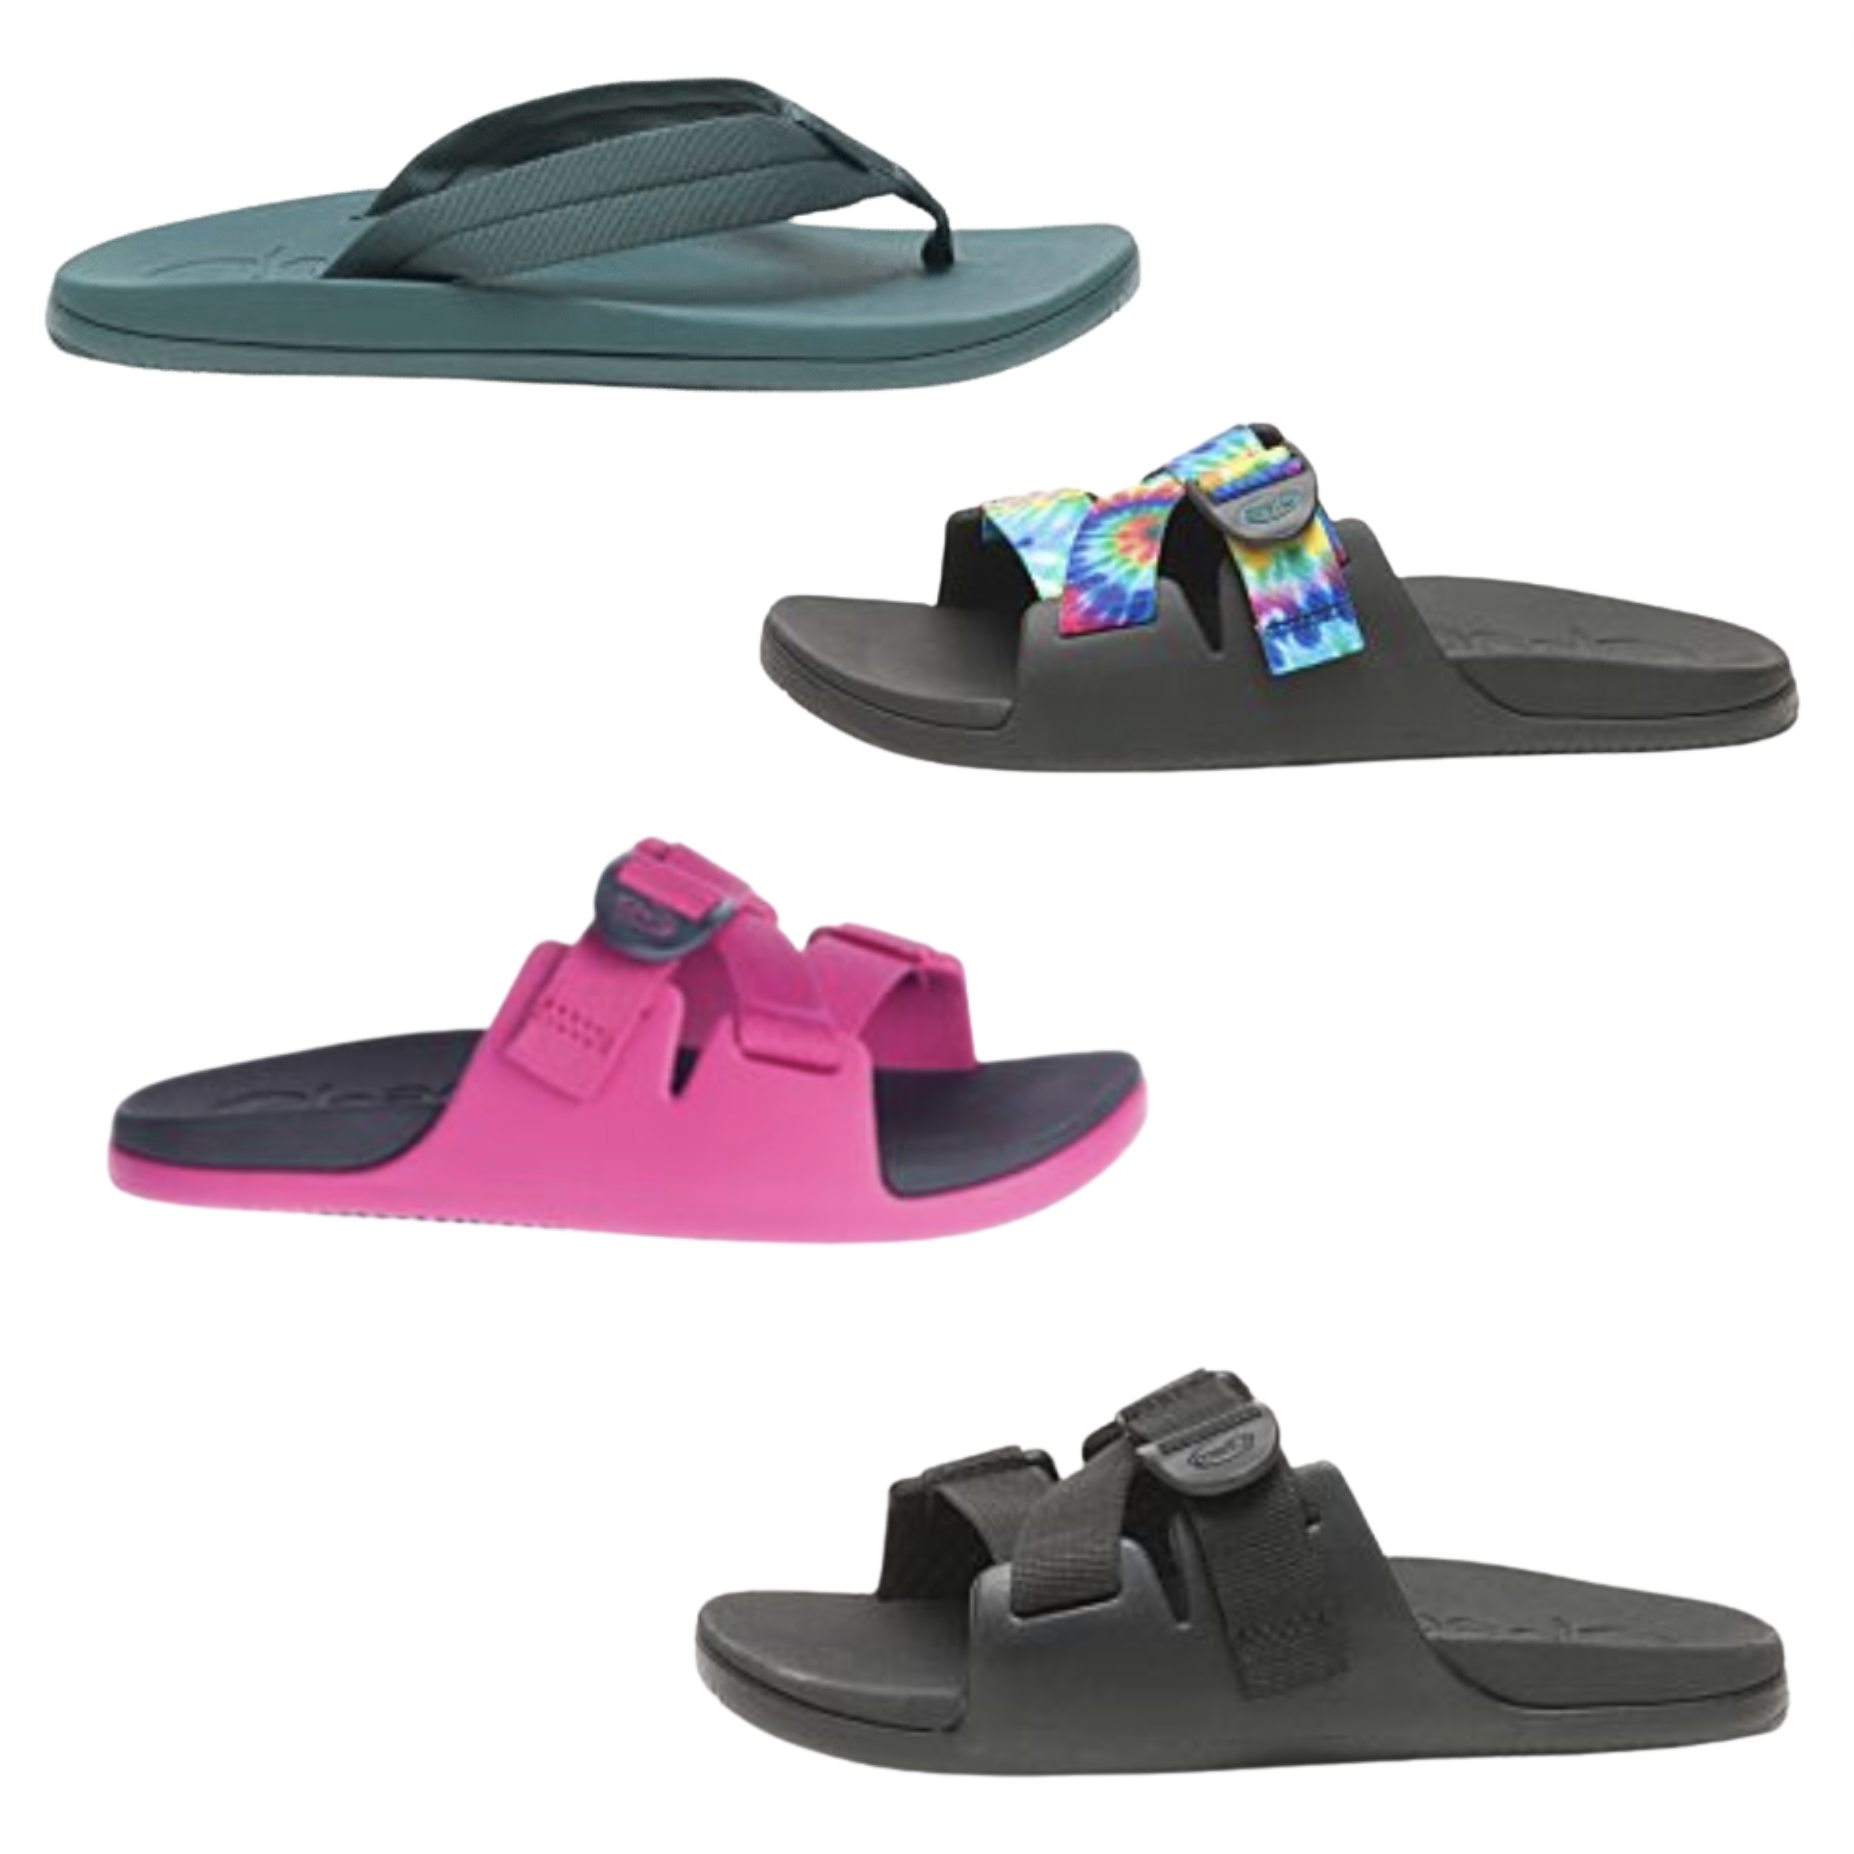 Chaco Chillo sandals for $20, free shipping - Clark Deals